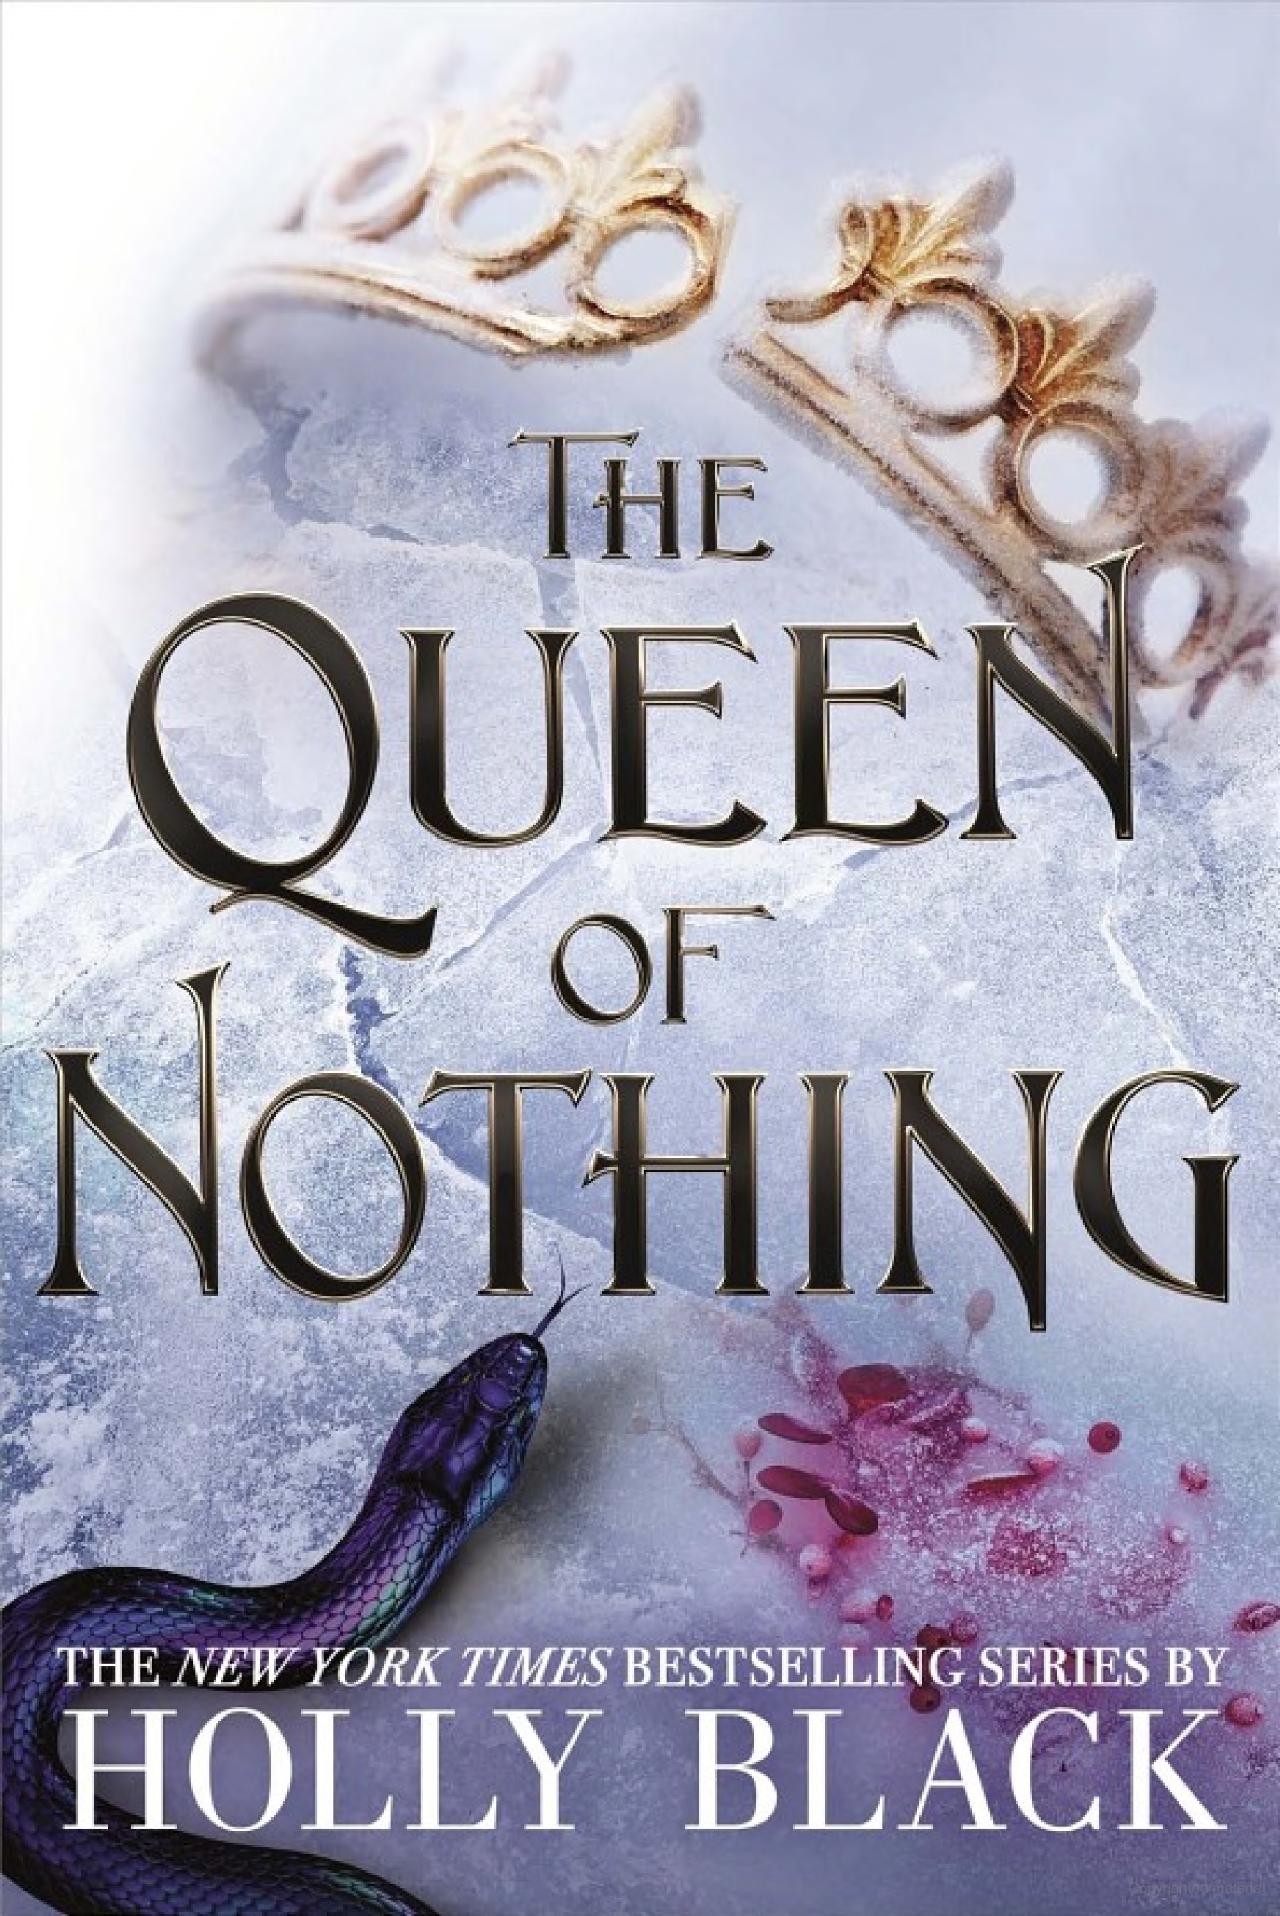 The Queen of Nothing
Book by Holly Black